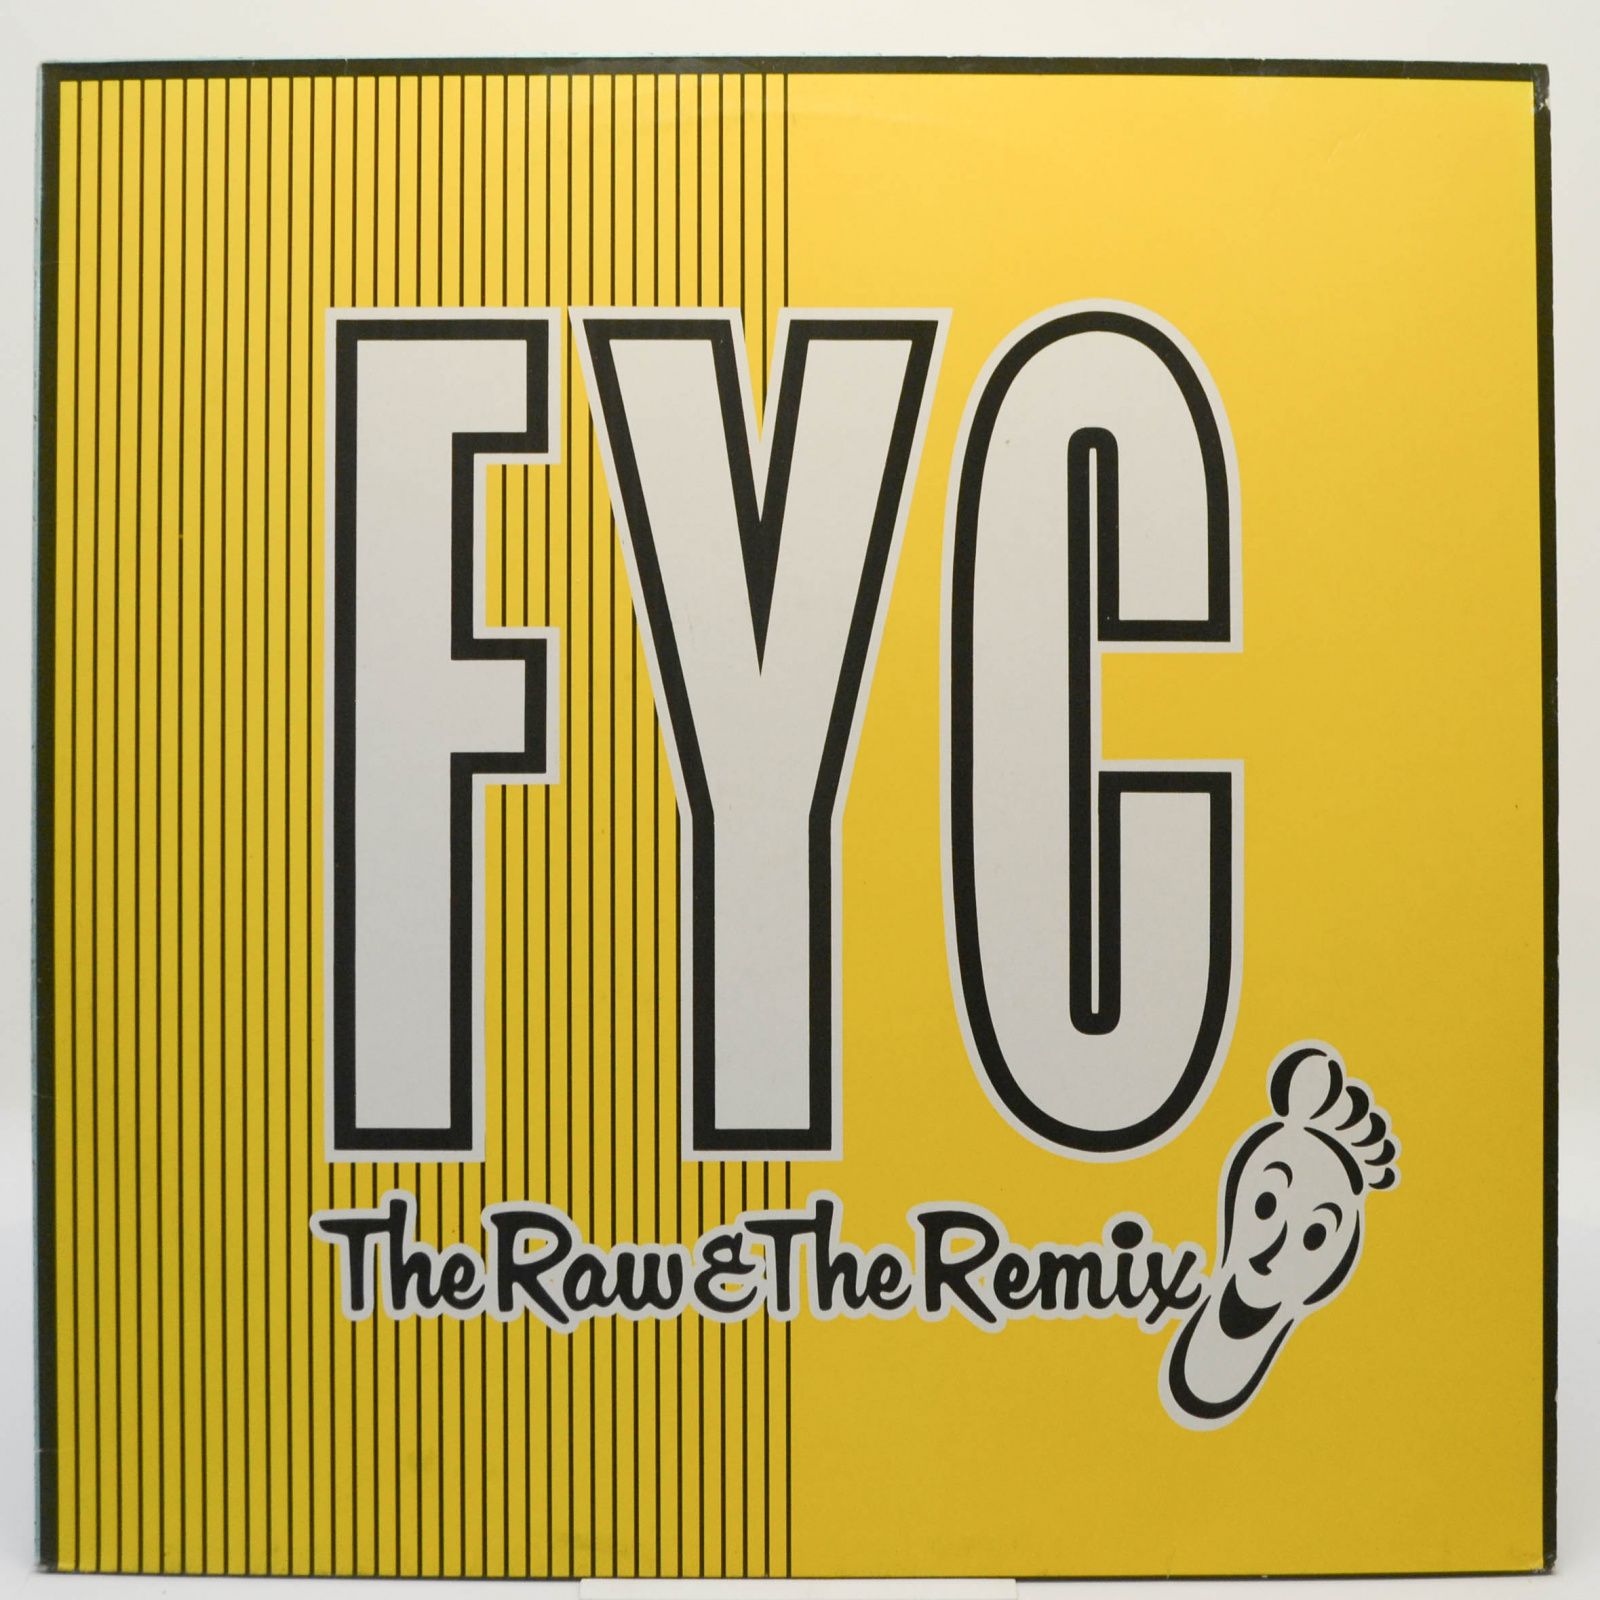 FYC — The Raw & The Remix, 1990